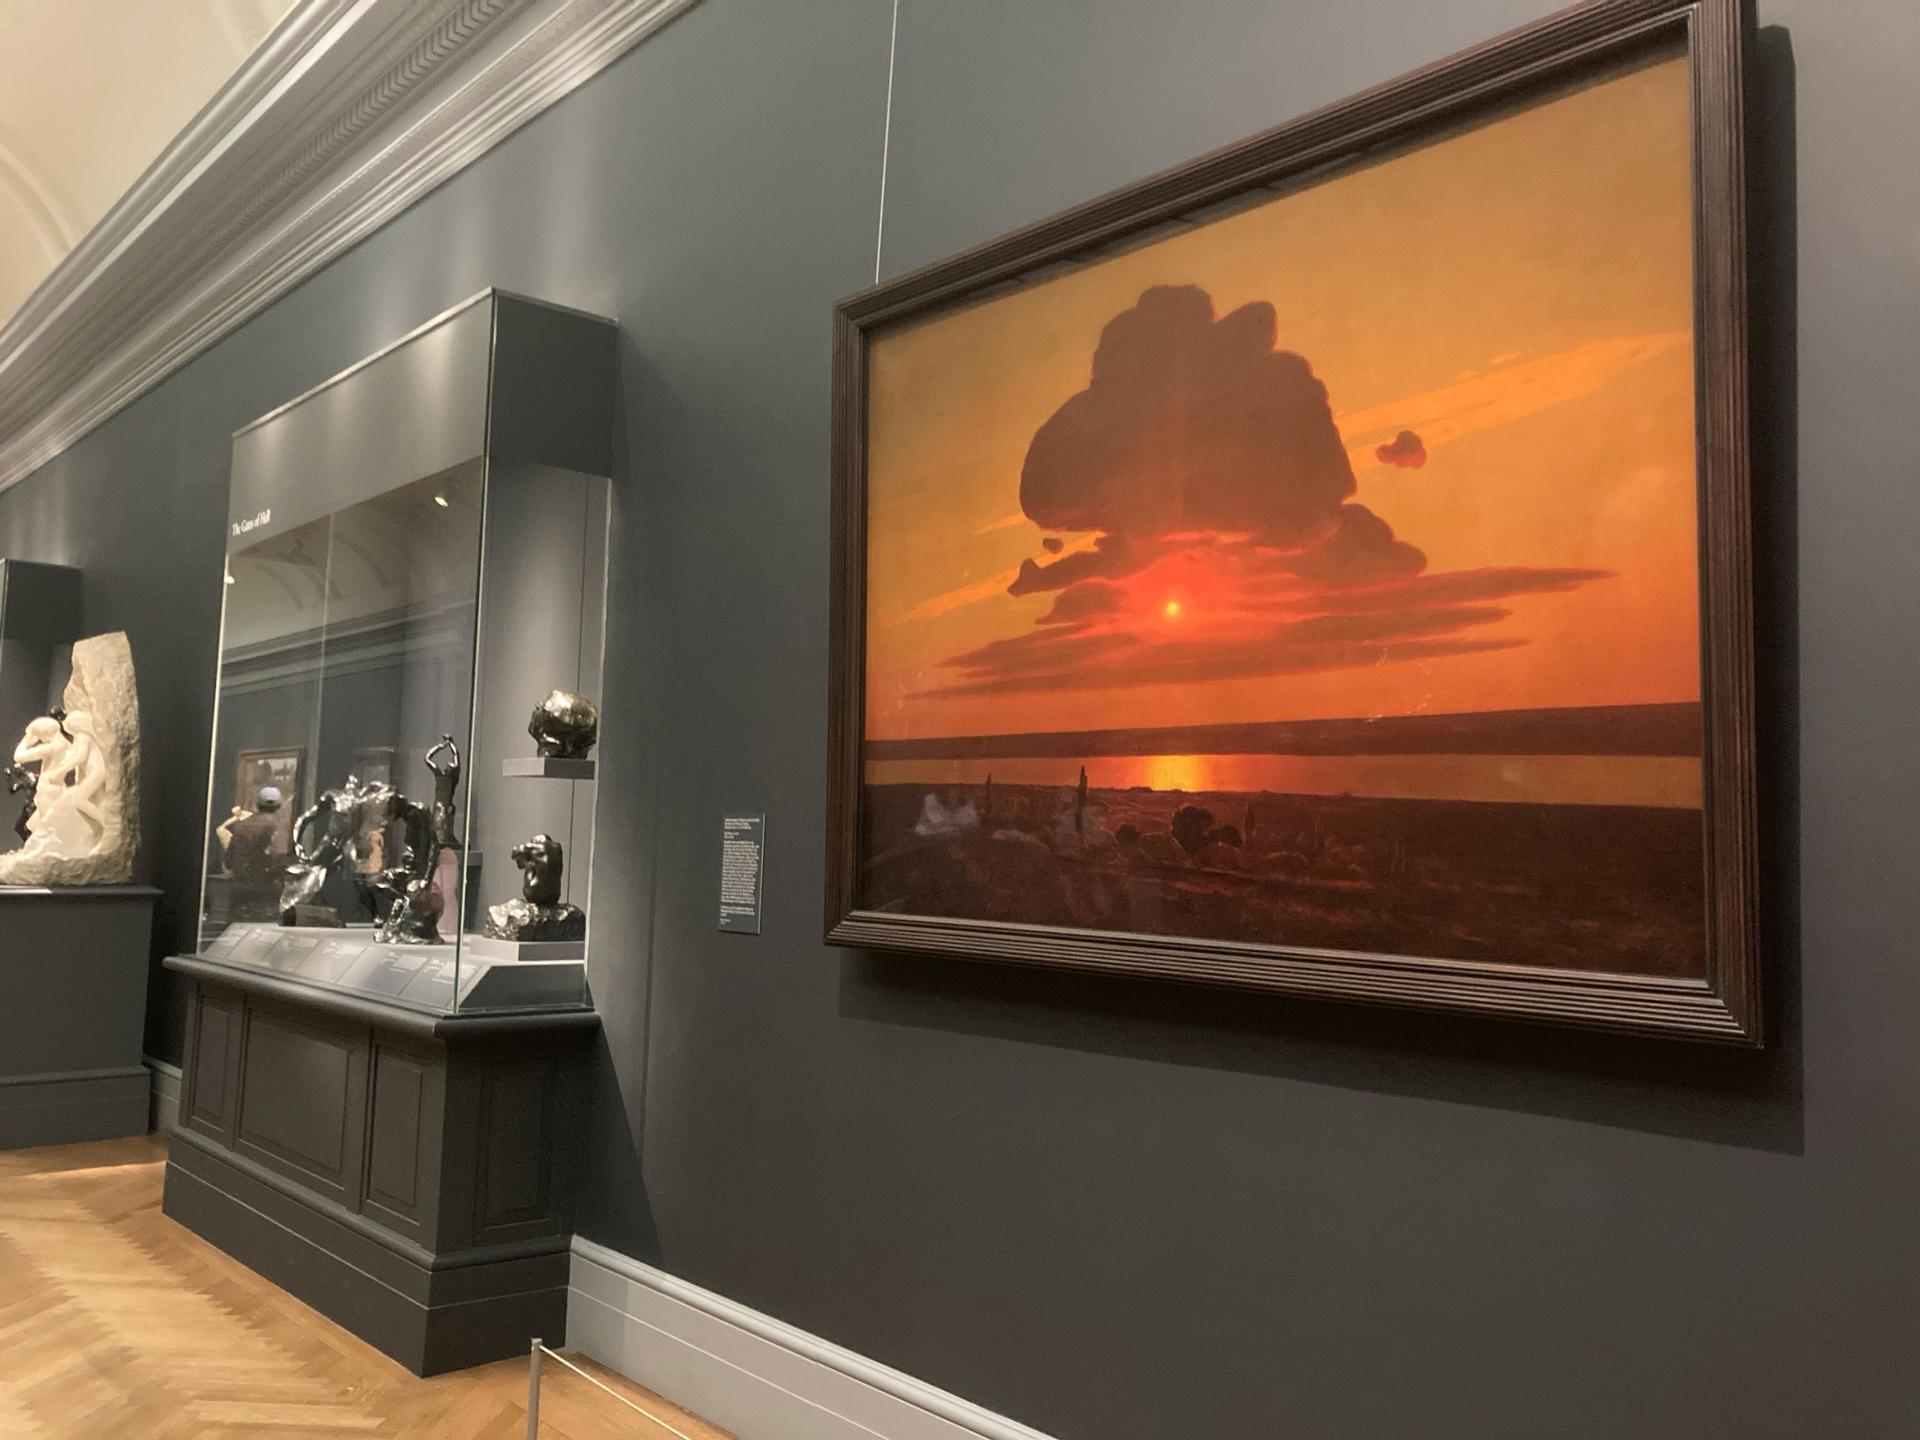 A painting of a red and orange sunset on display against a gray wall near a glass case of sculptures.